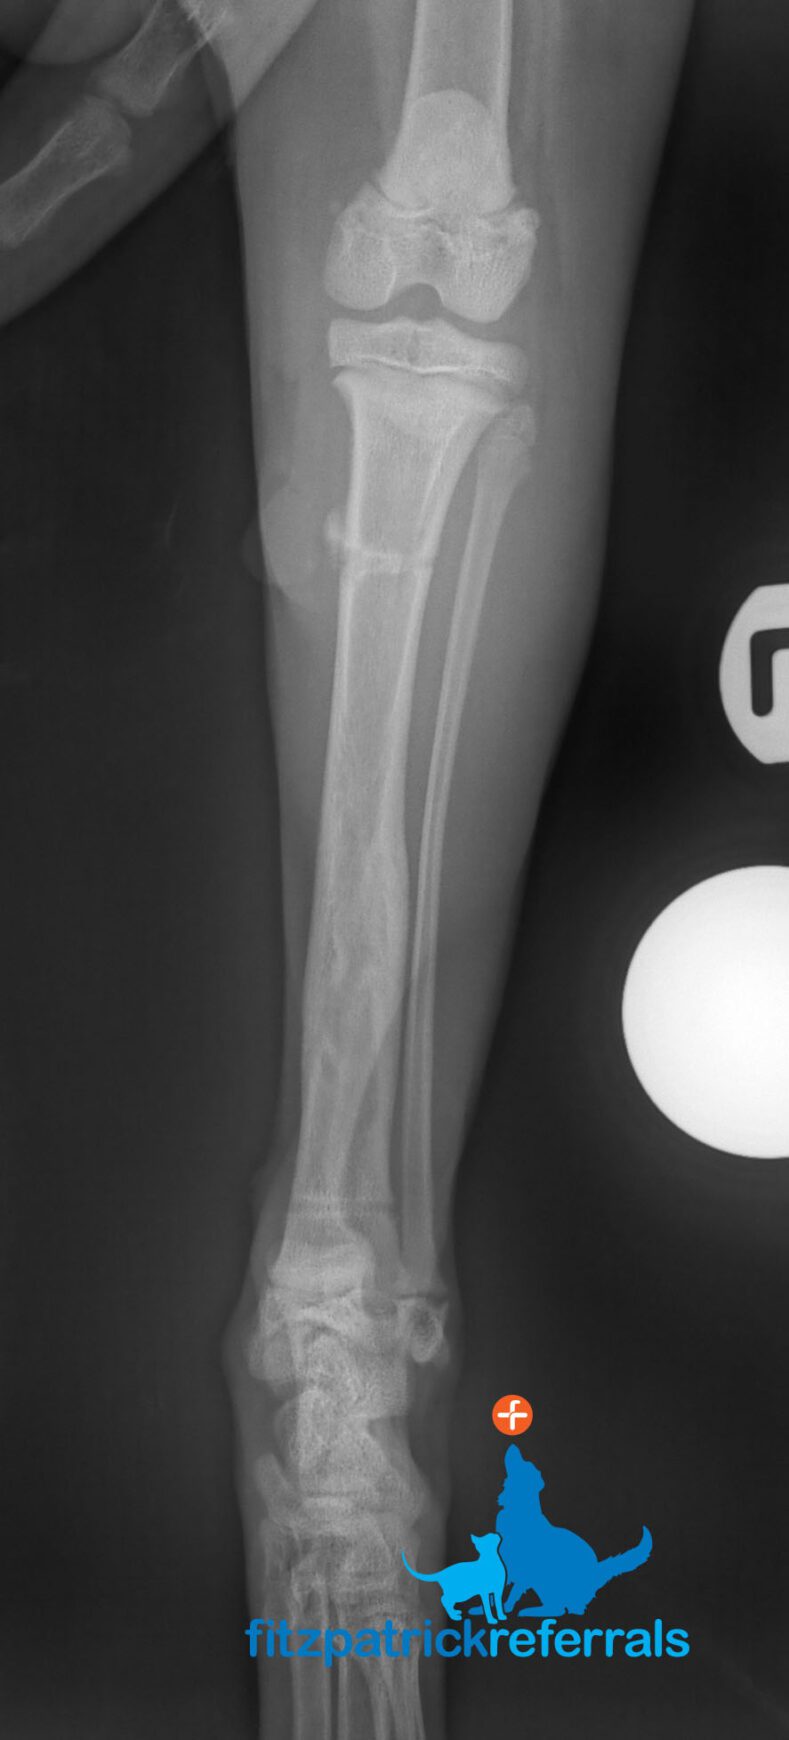 X-ray image of cat's hind leg